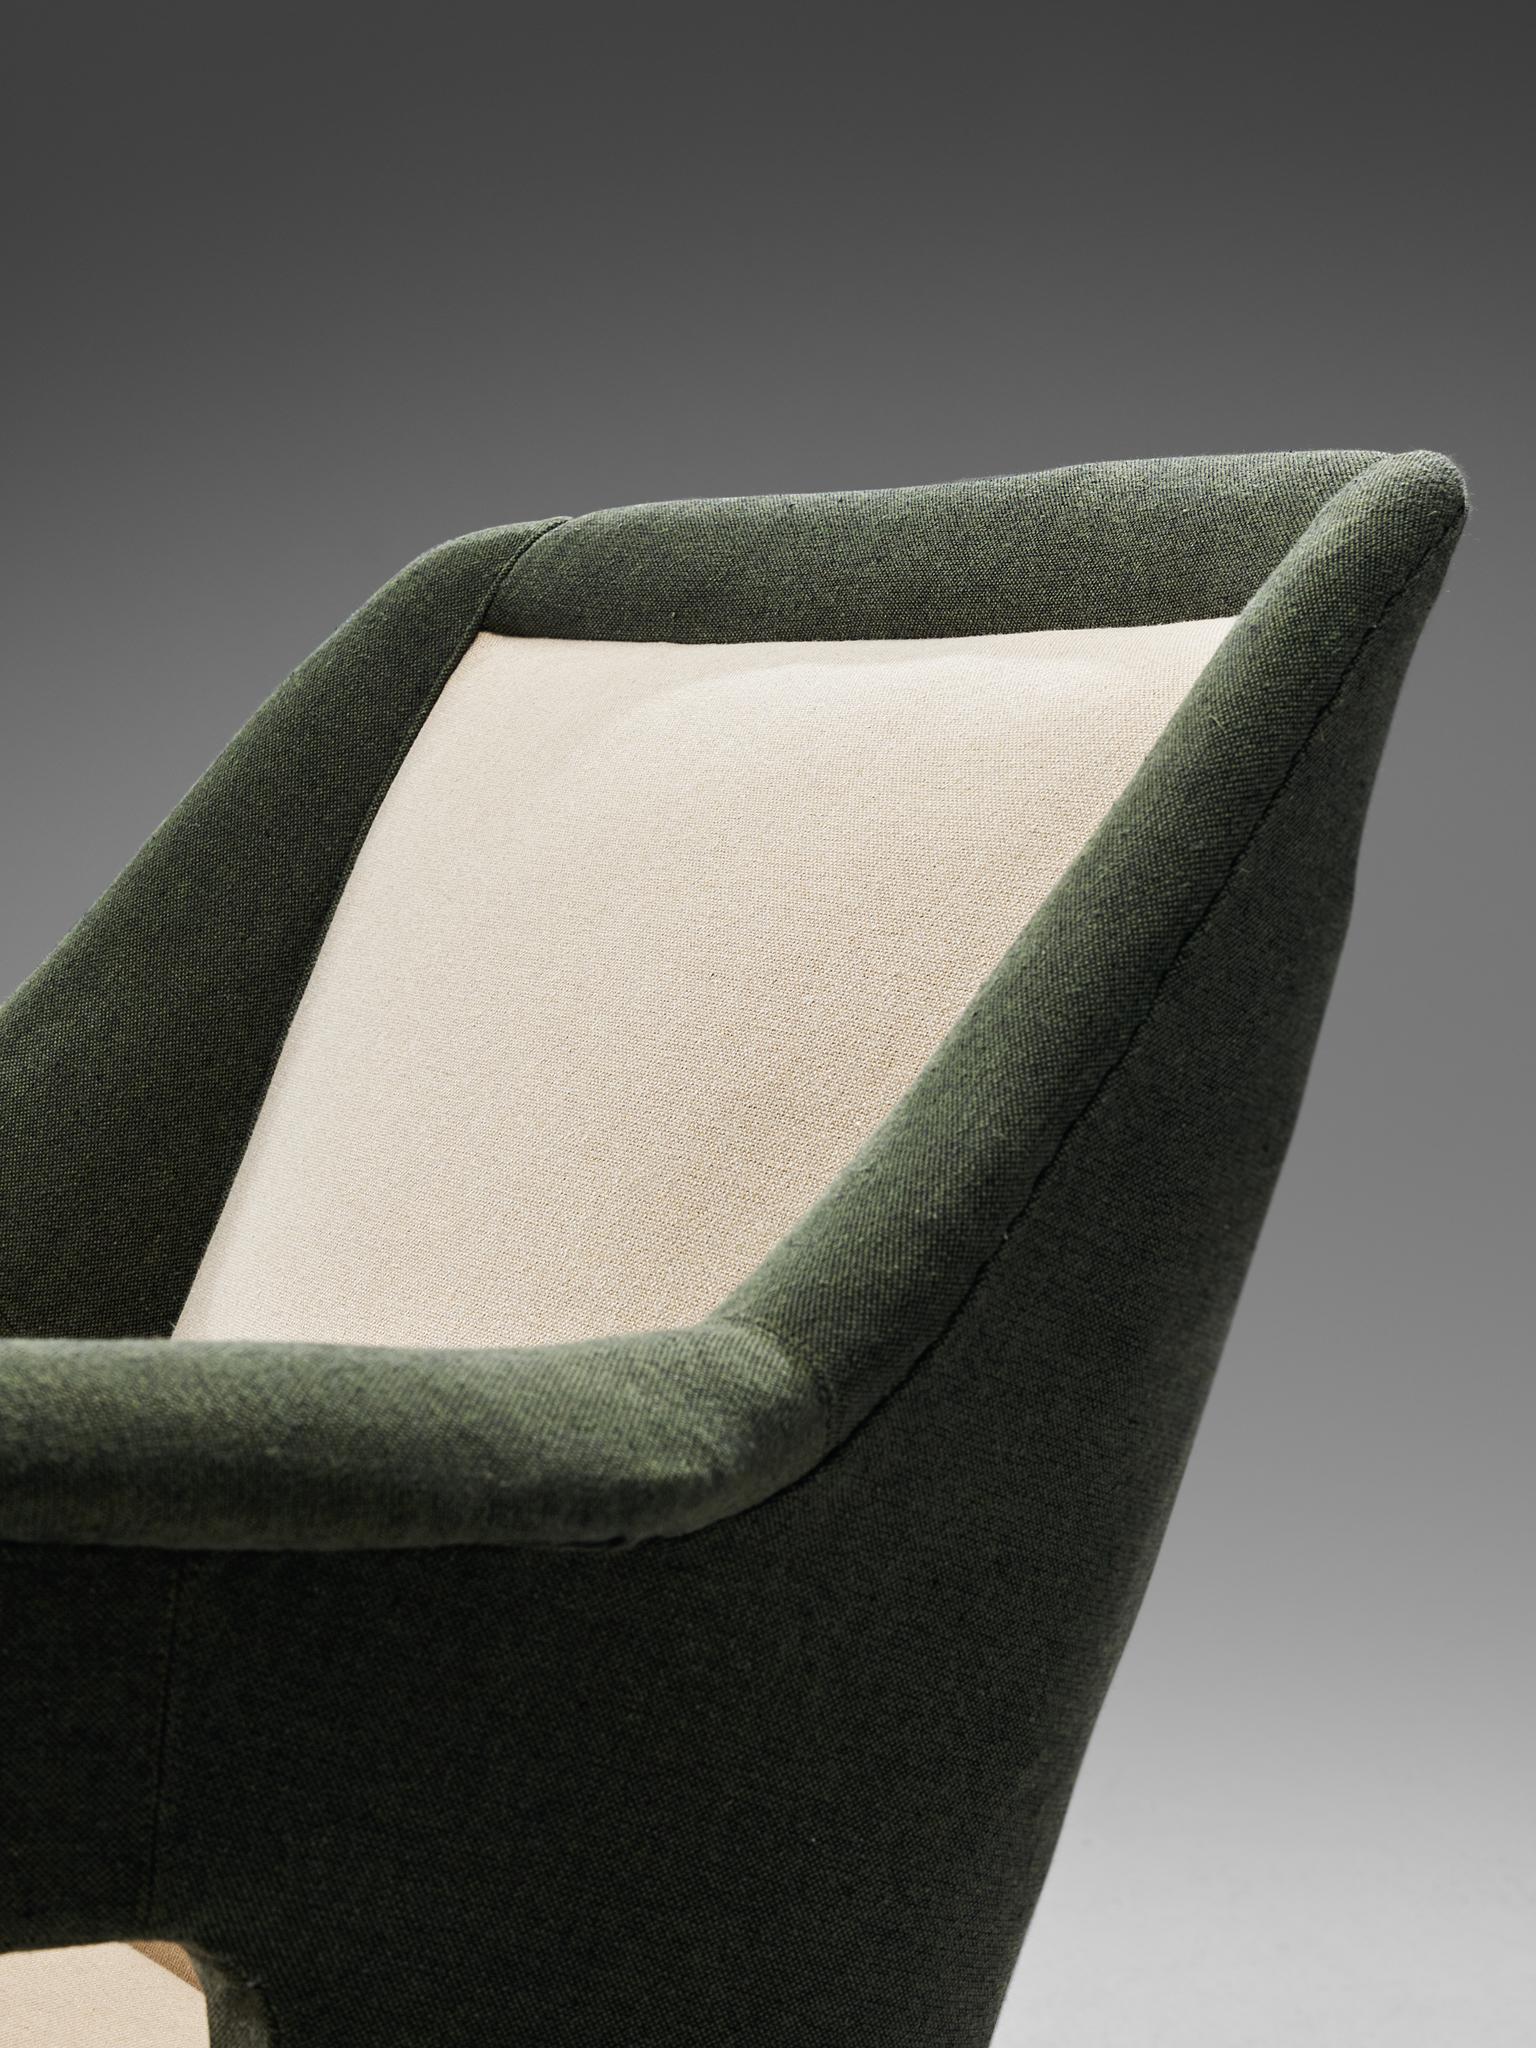 Pair of Italian Lounge Chairs in Forrest Green and Off-White Upholstery 3